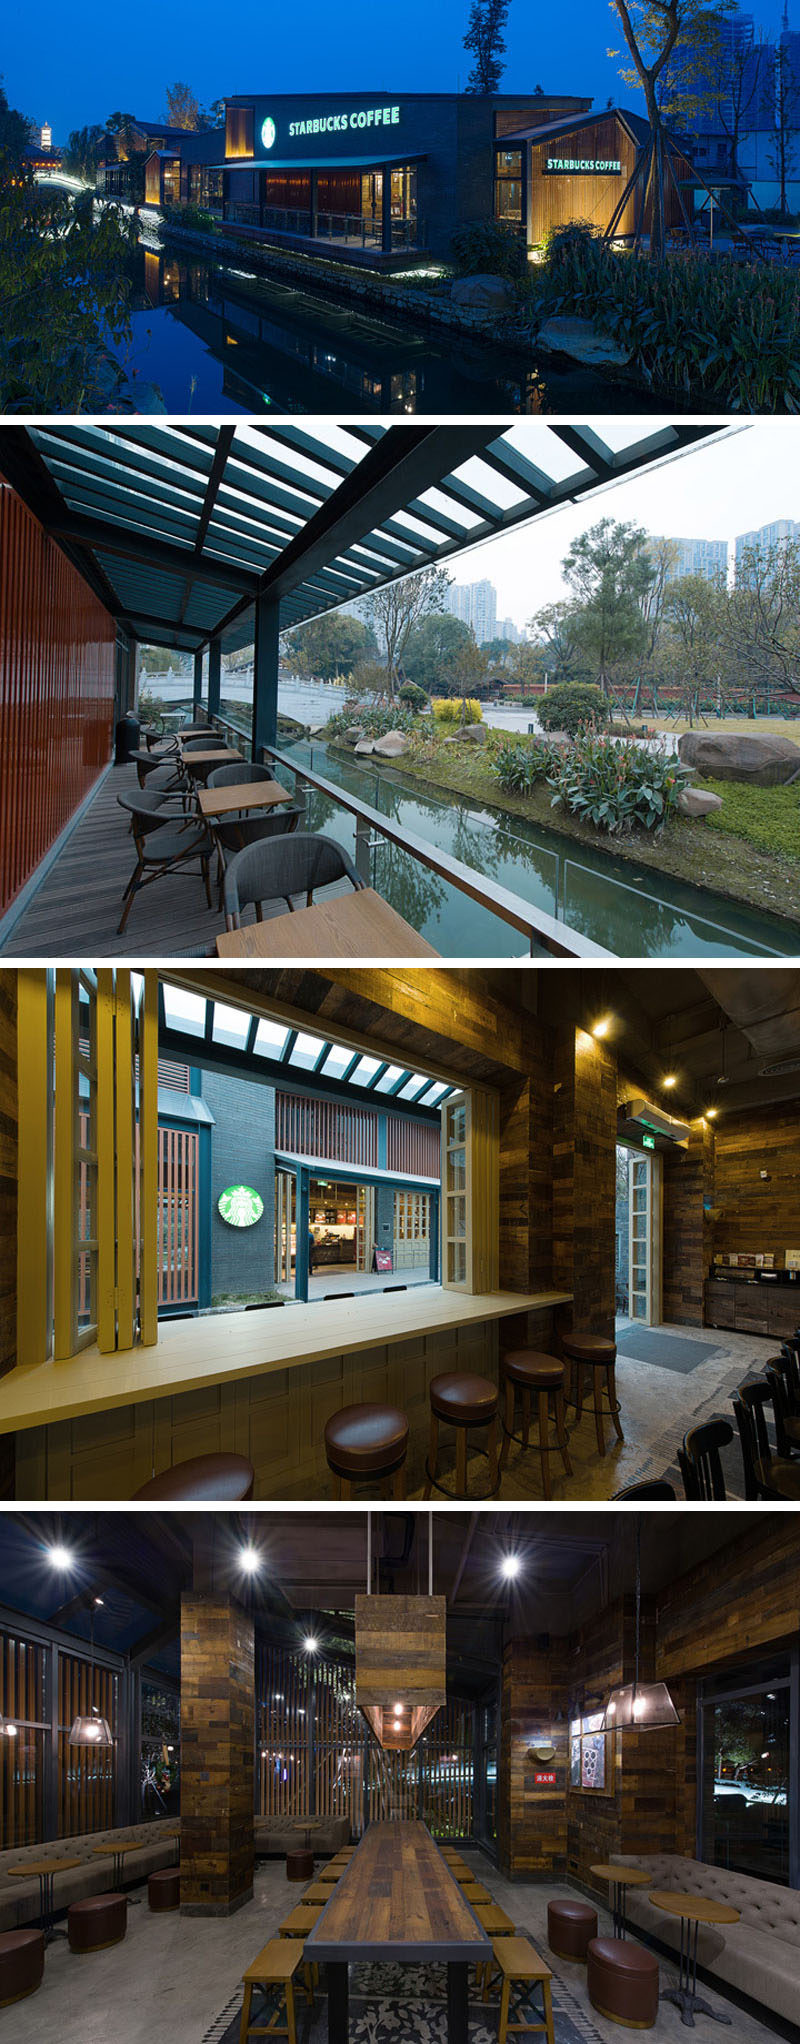 11 Starbucks Coffee Shops From Around The World // Made up of two freestanding buildings along the Jinjiang River in Chengdu, China, this Starbucks location uses large sliding doors and windows to create a feeling of connection between the two spaces and nature.